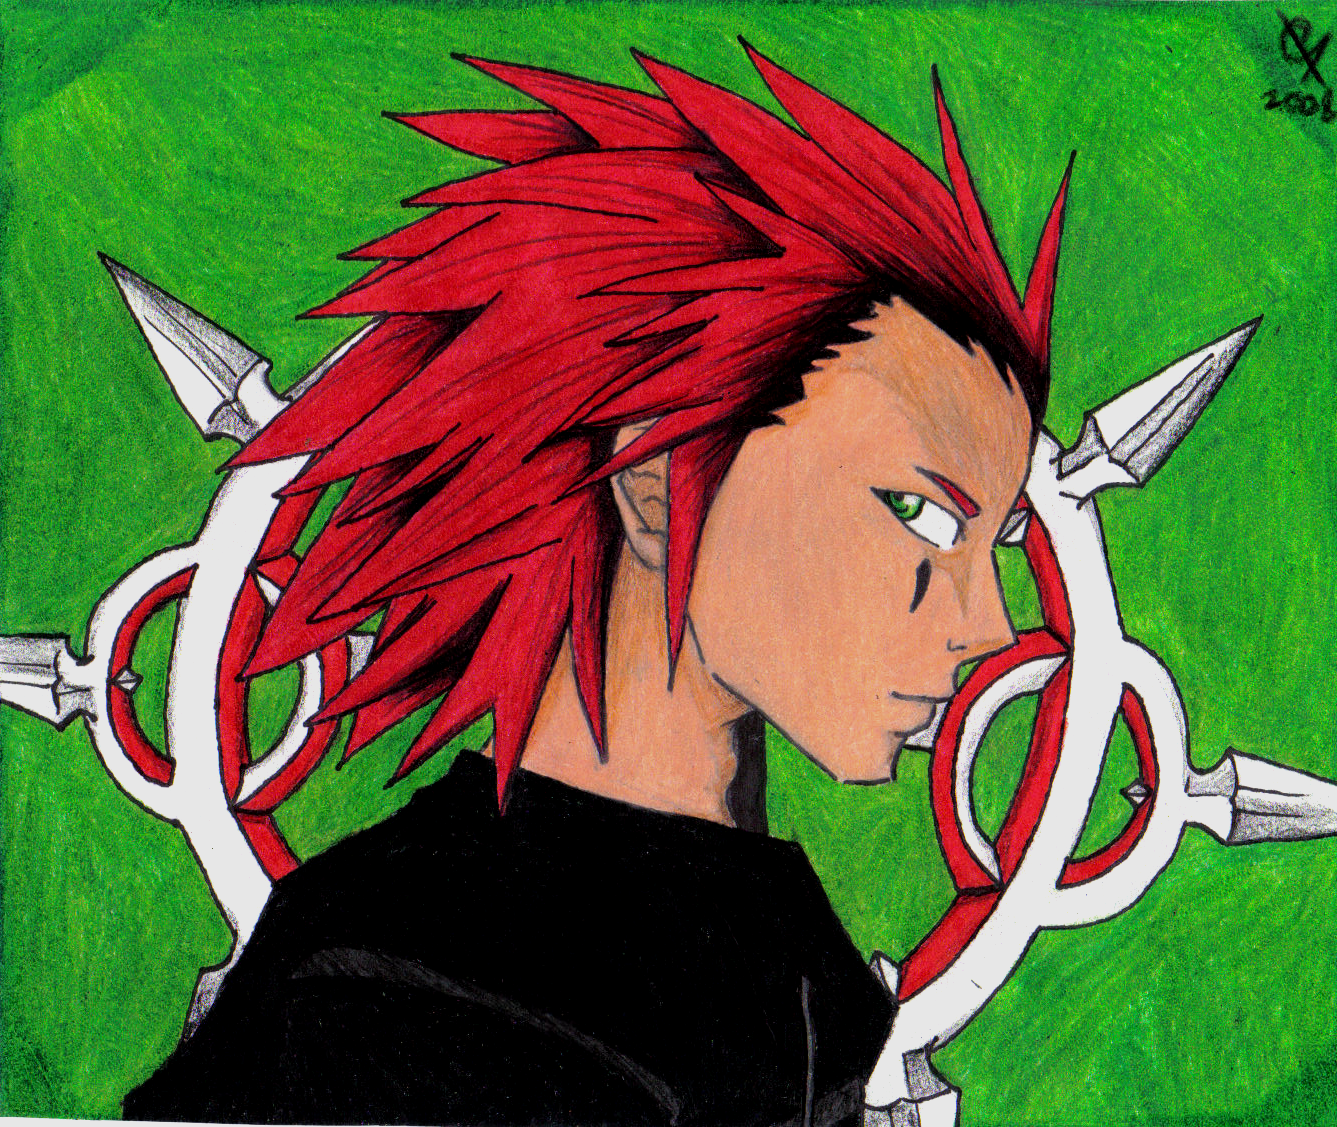 Axel by weewoo